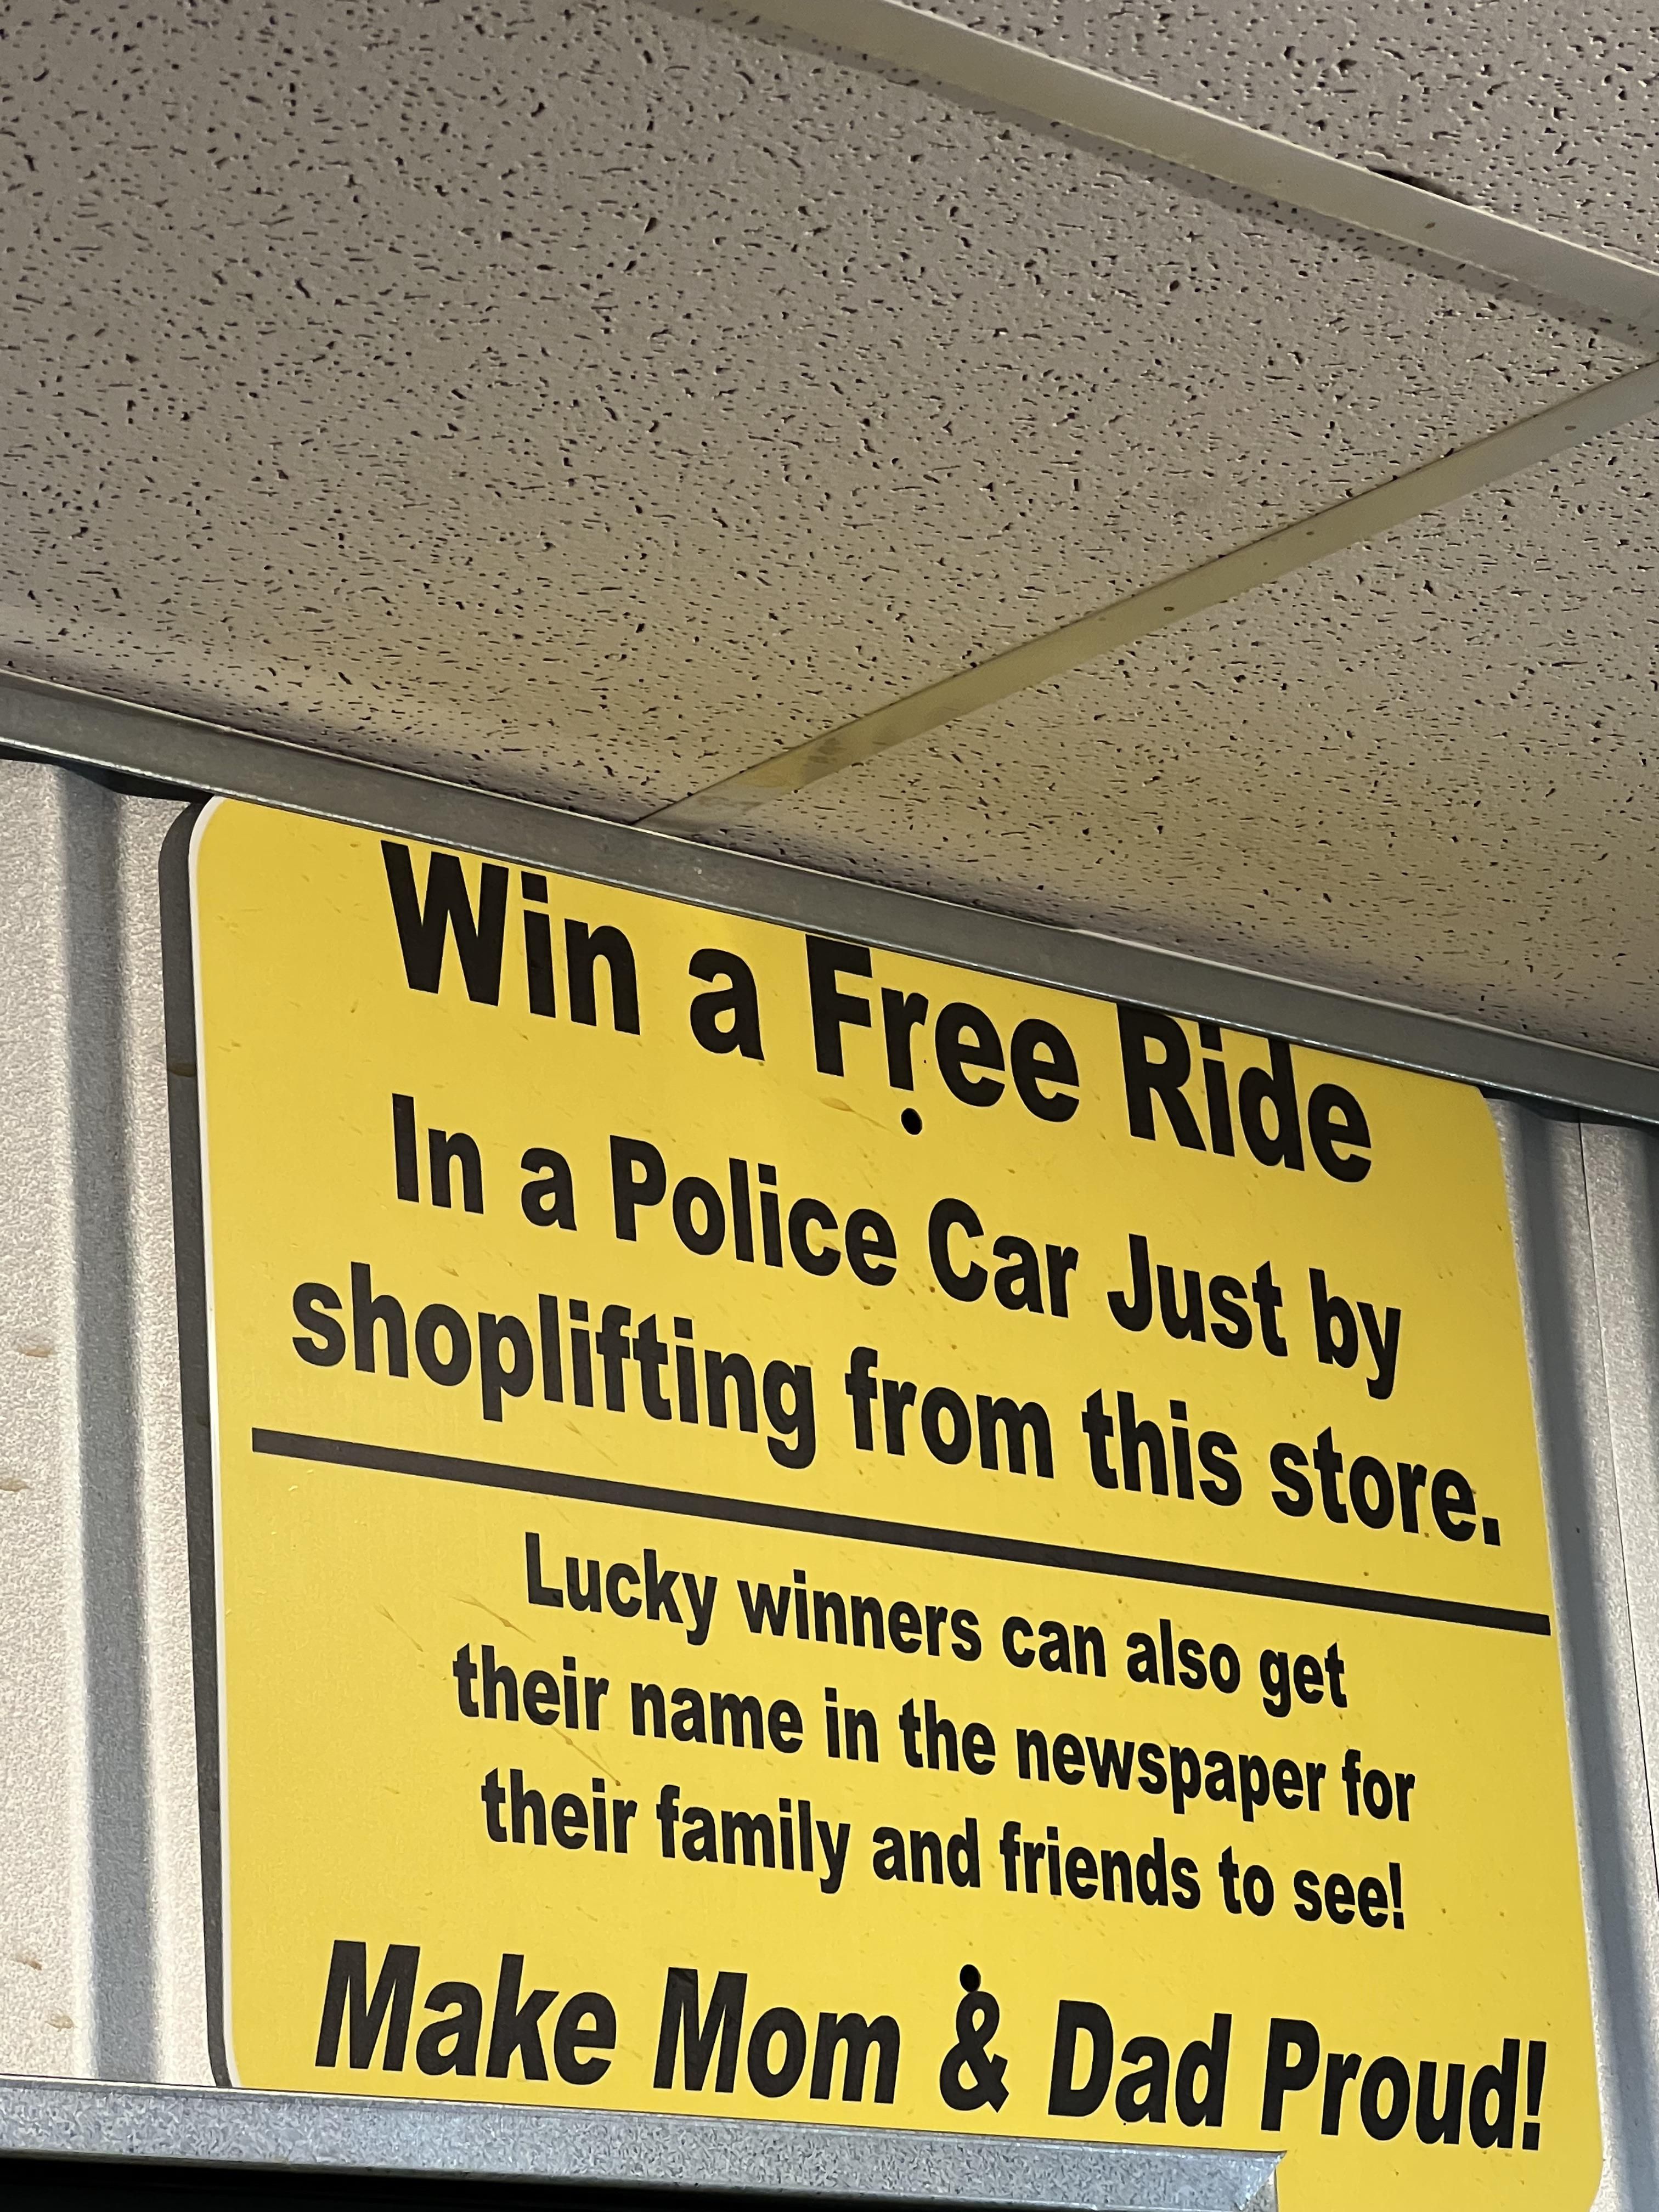 Saw this yesterday at a gas station